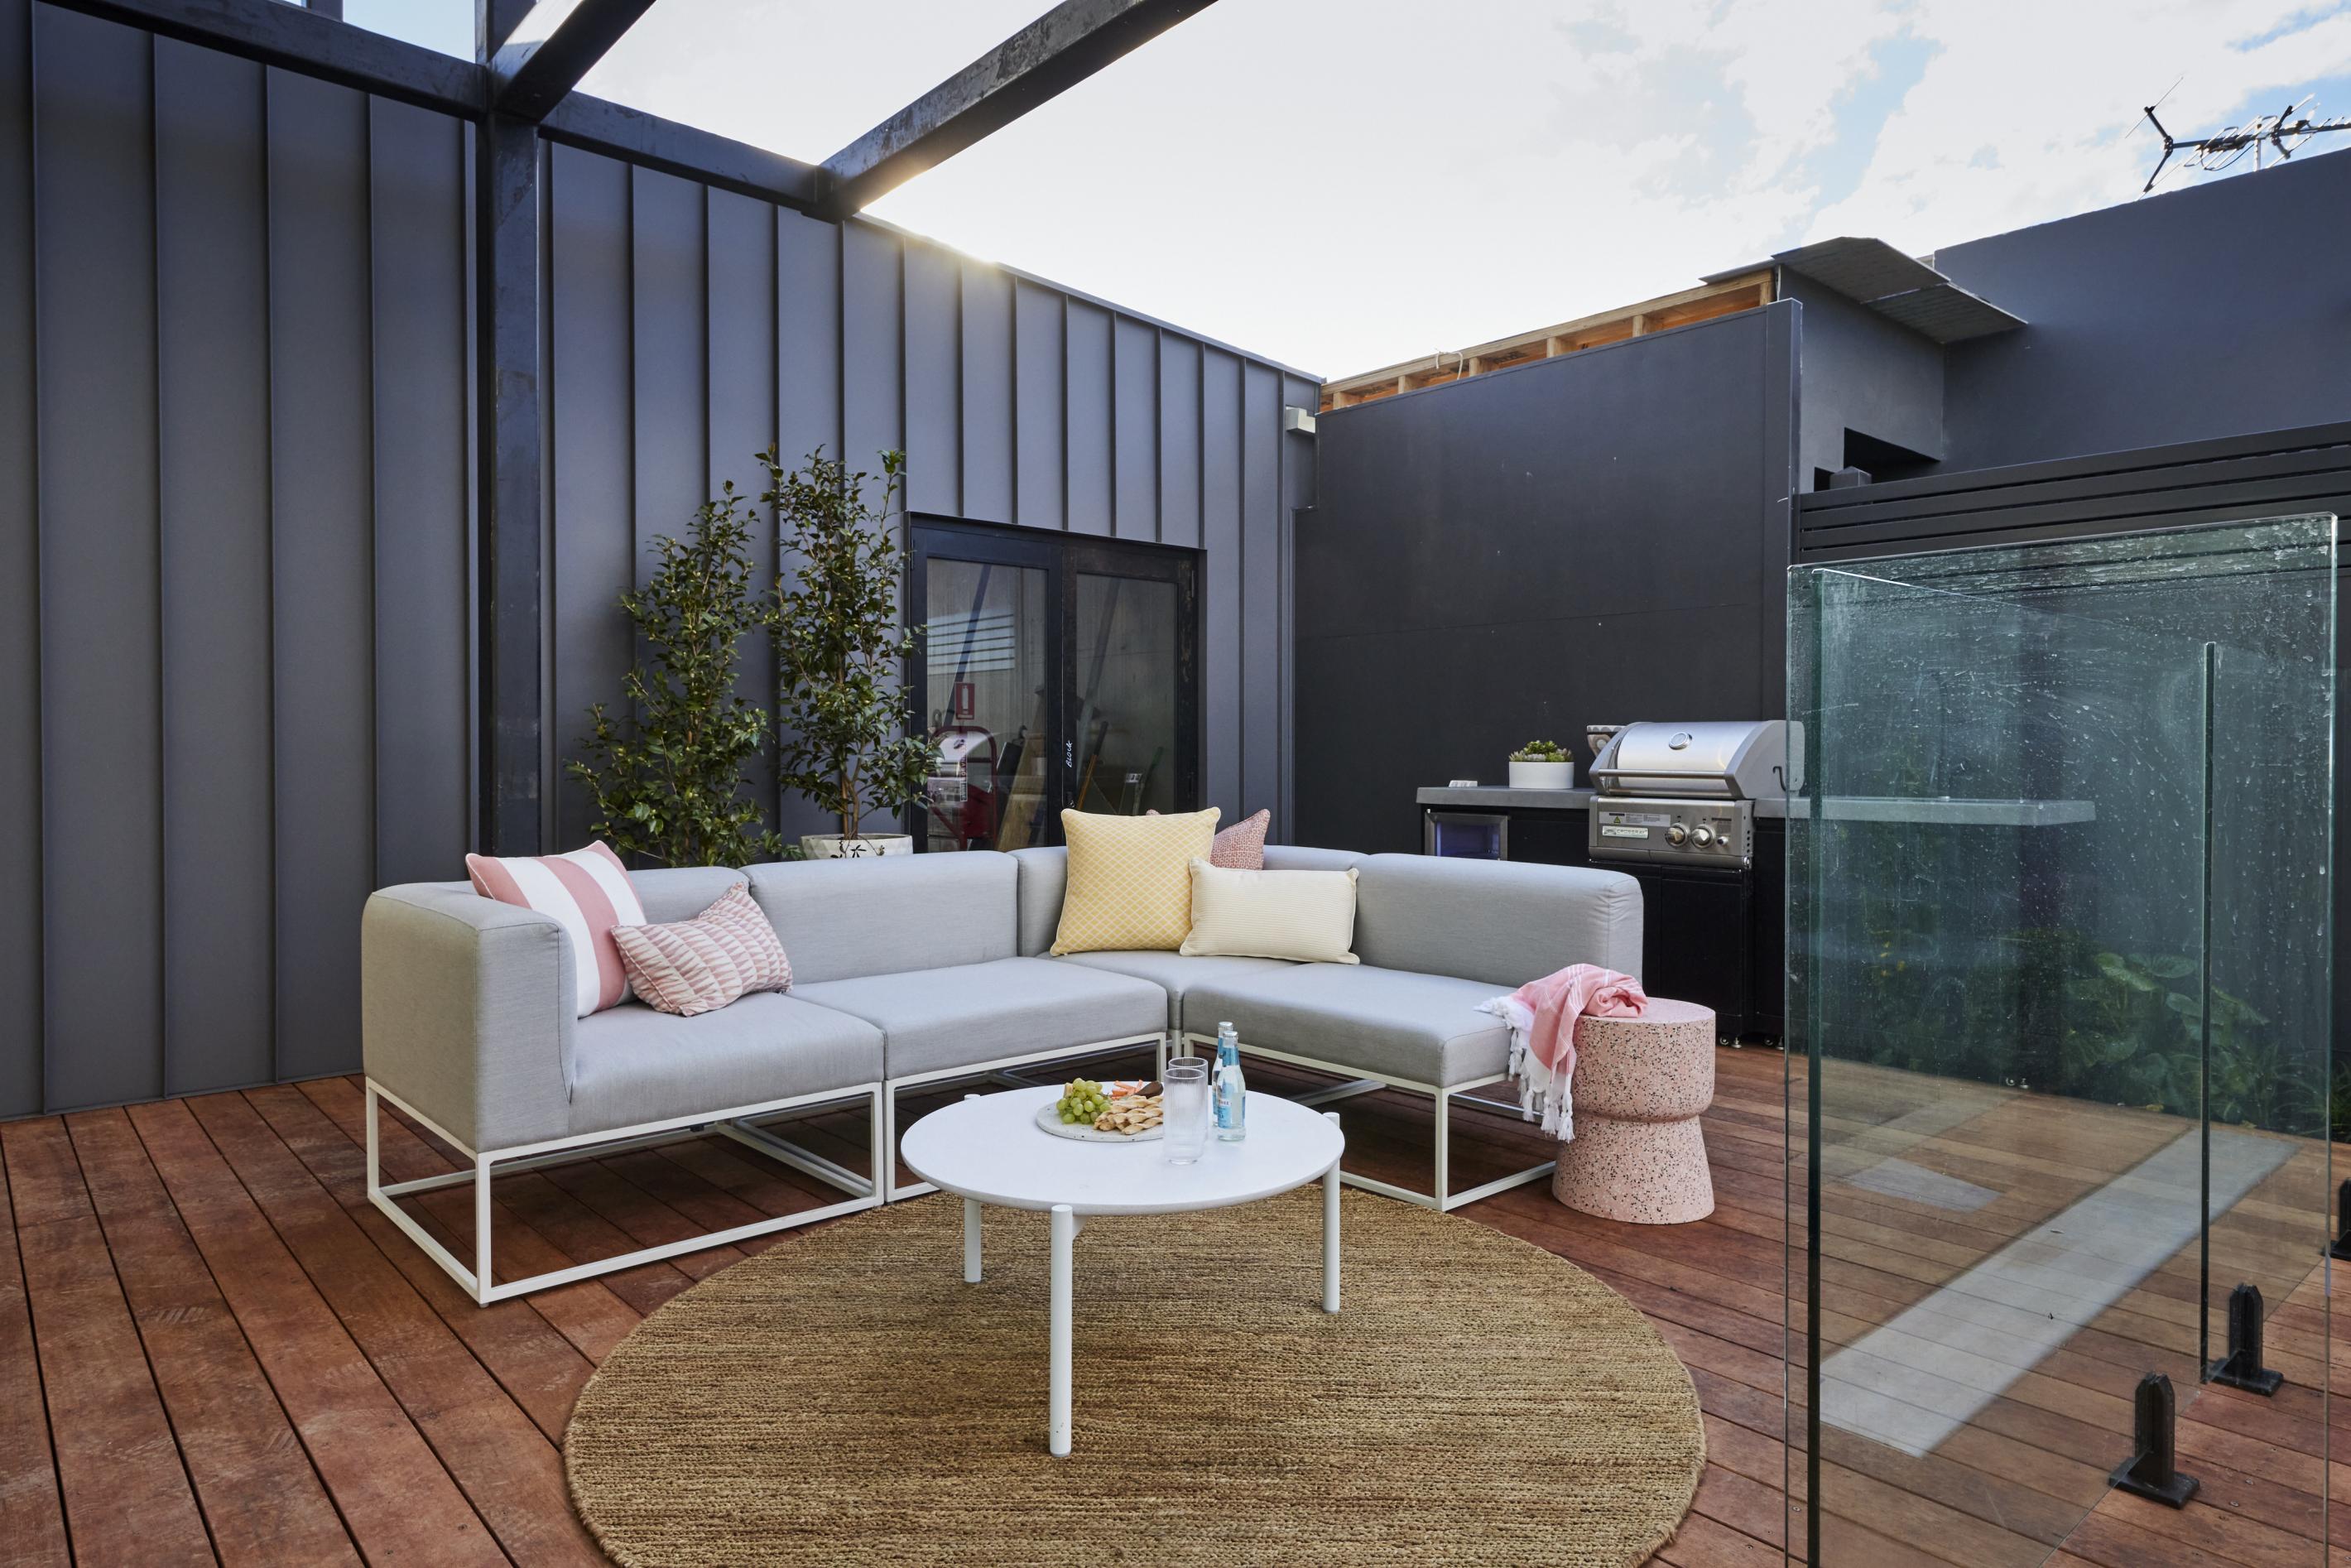 The Block 2021 Week 10 Garden. walling made from COLORBOND® steel in this outdoor entertaining terrace.